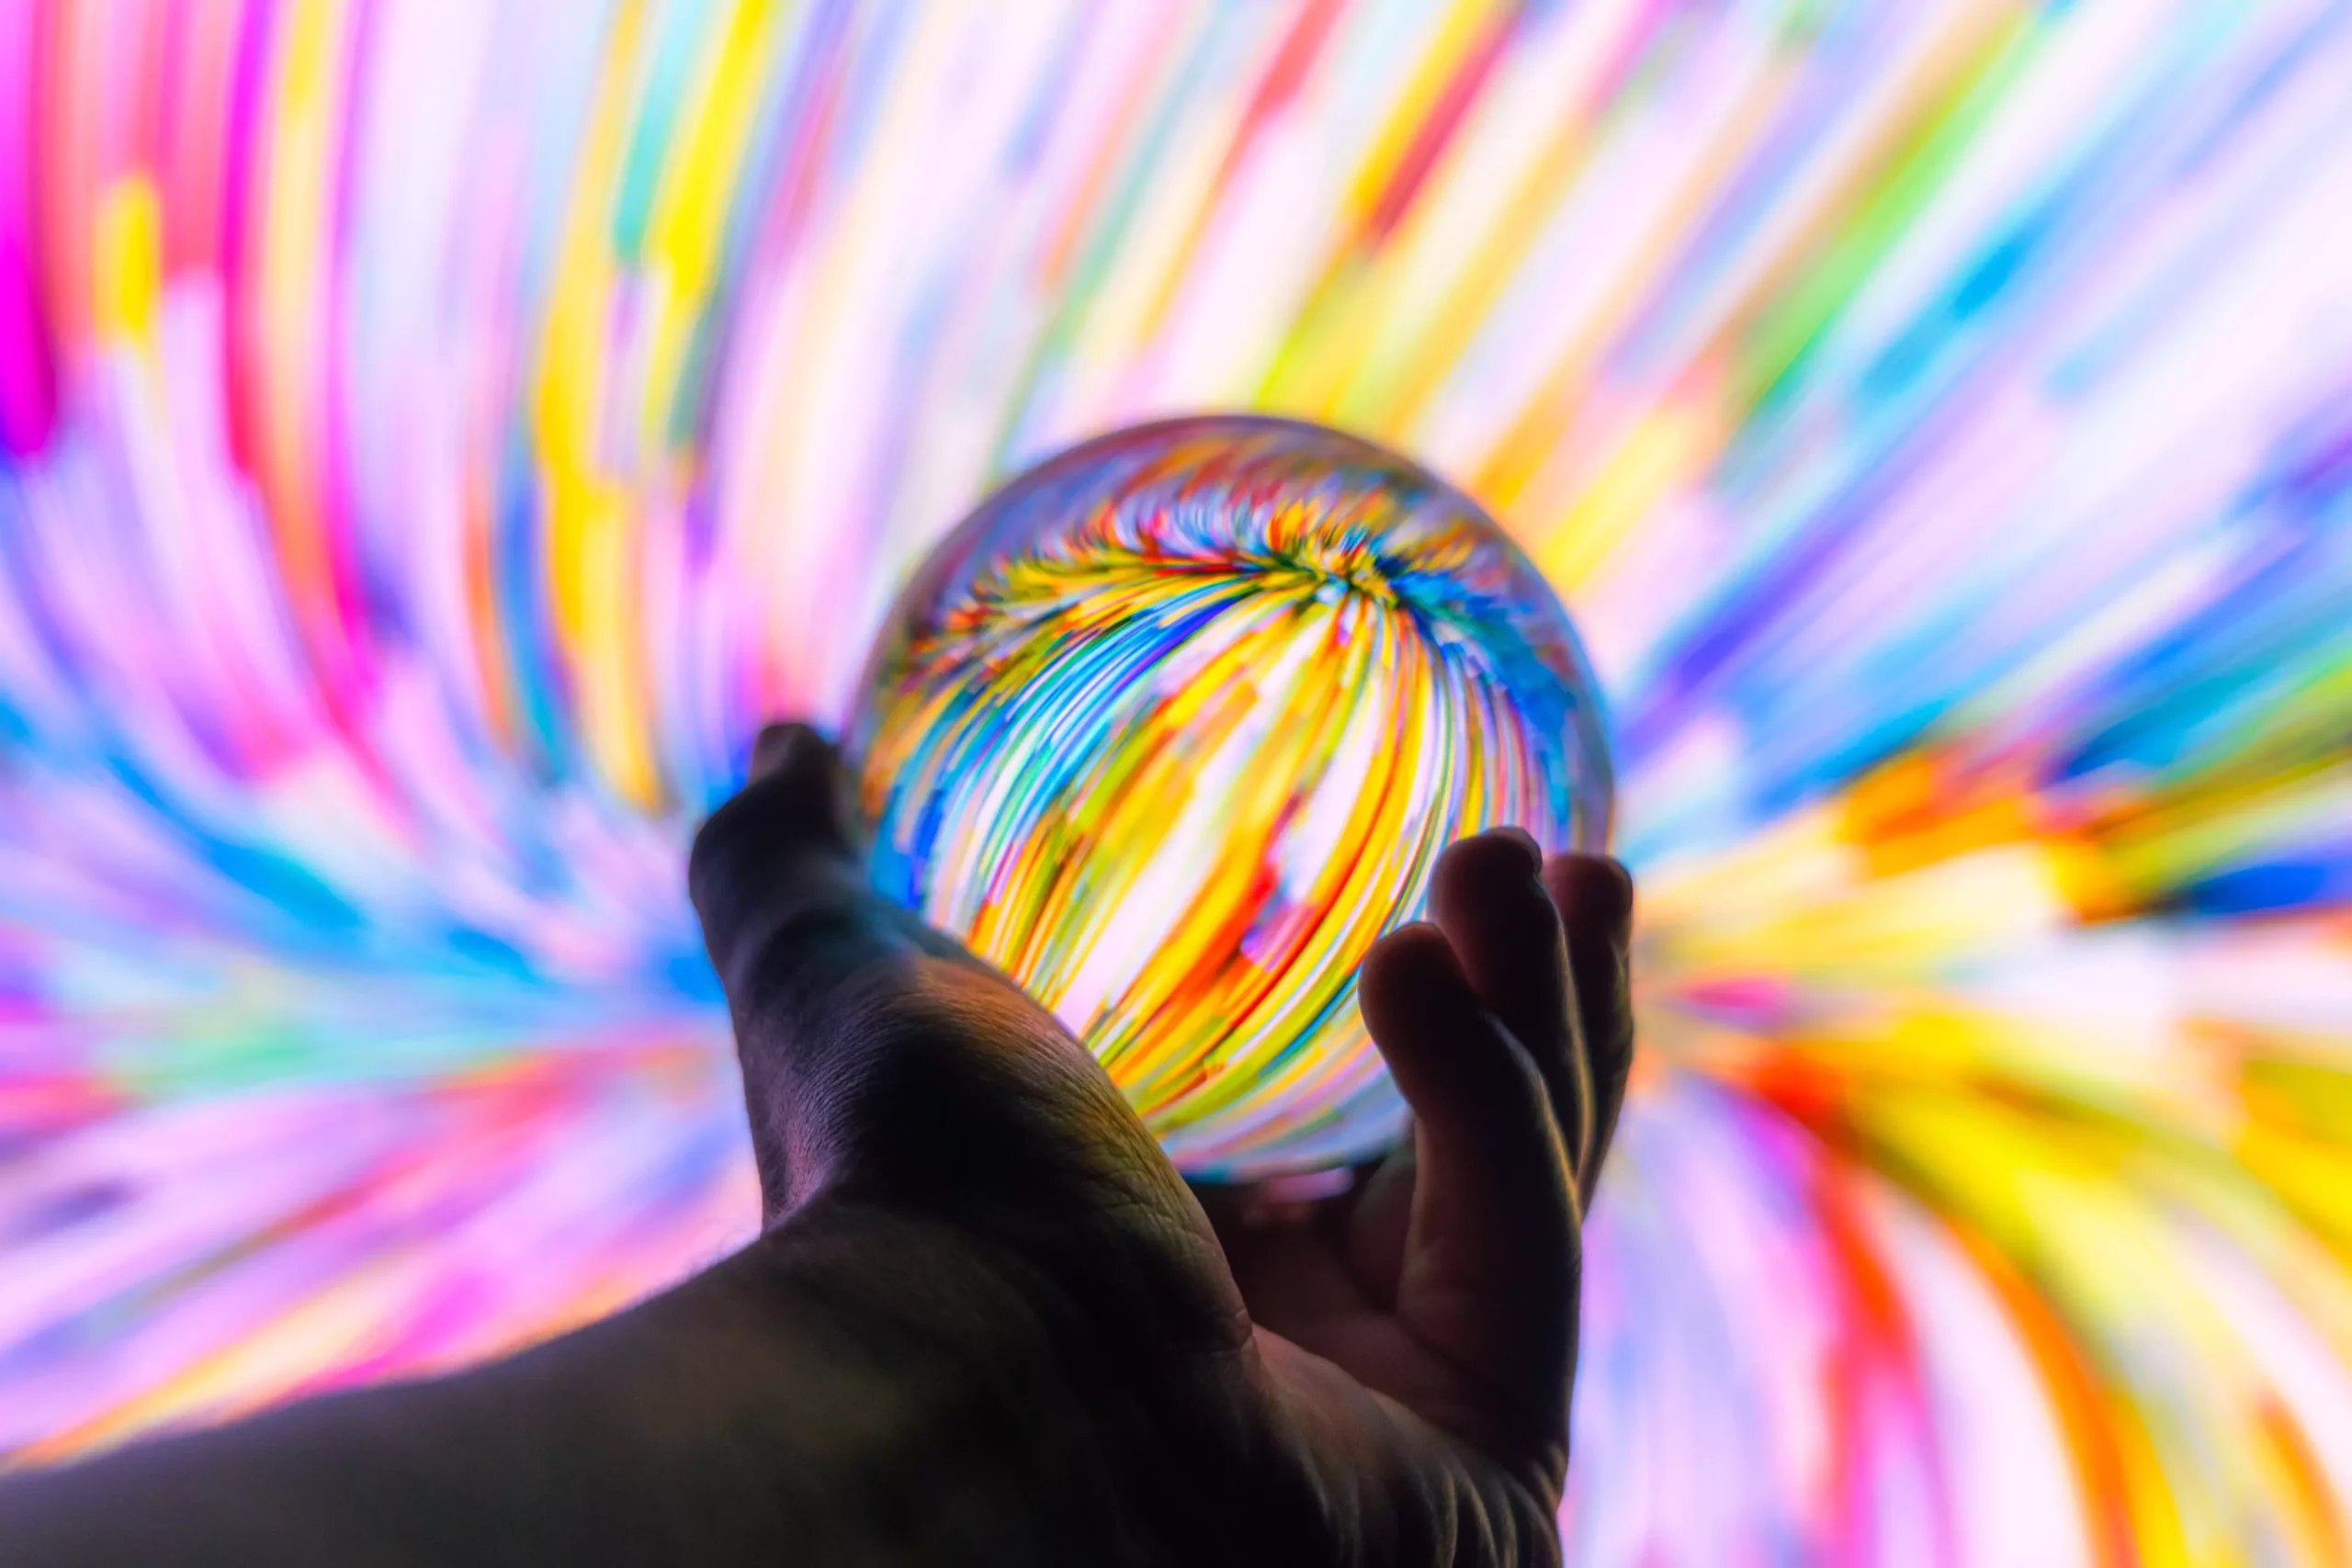 Holding a crystal ball through colorful background